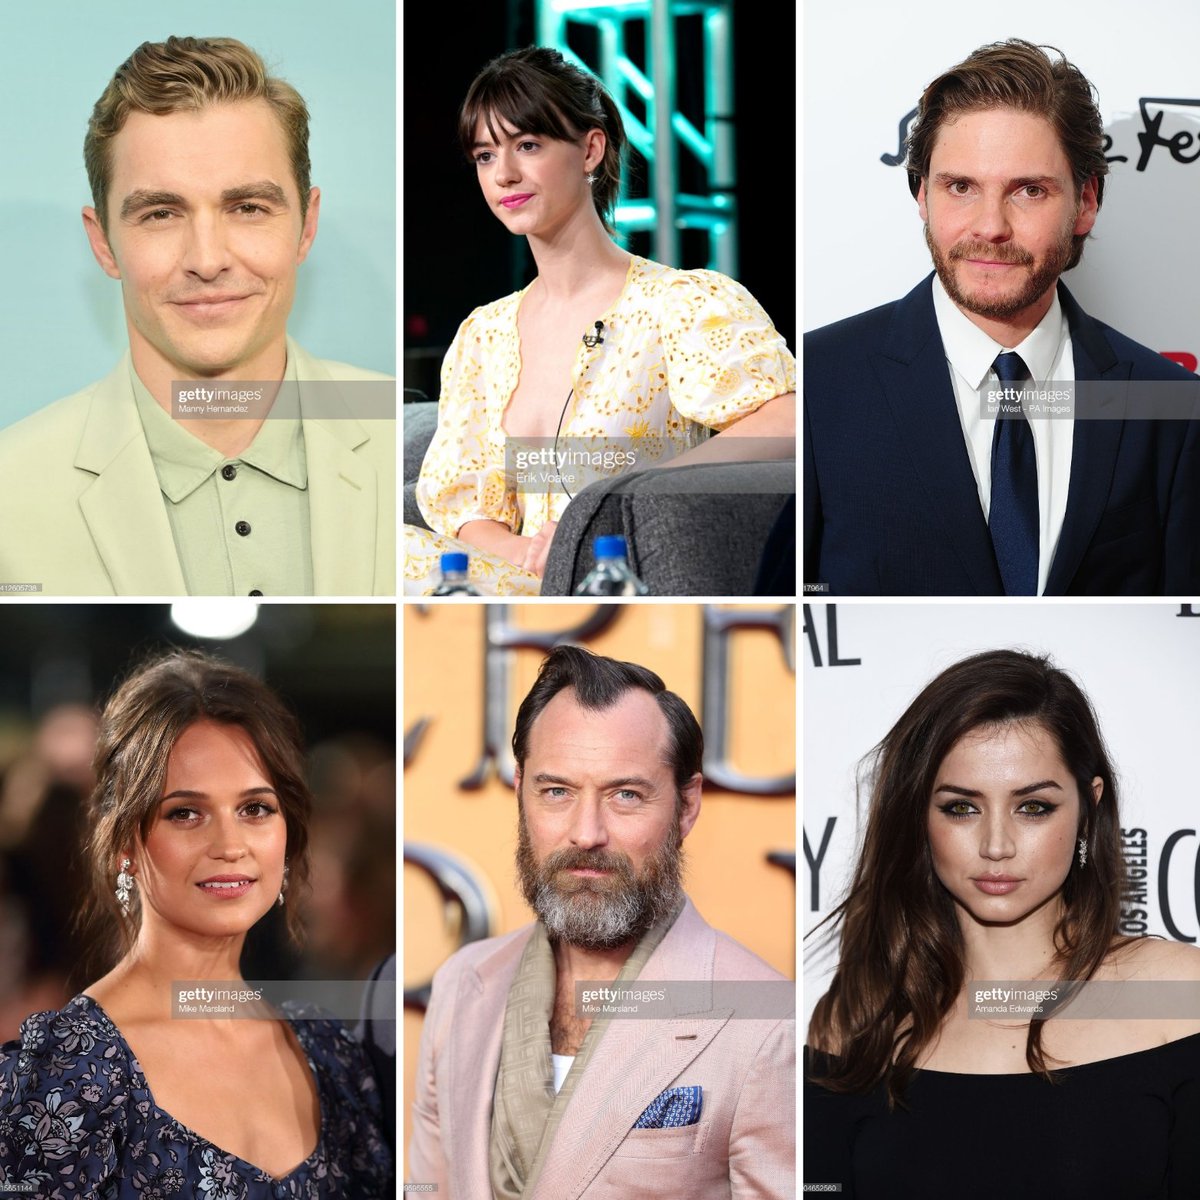 Dave Franco joins Ana De Armas, Daniel Brühl, Jude Law, Alicia Vikander and Daisy Edgar-Jones in Ron Howard's surviving thriller 'Origin of Species'.

Franco, 37, who is married to actress Alison Brie, plays an Australian young man who is the brother of Alicia's character.